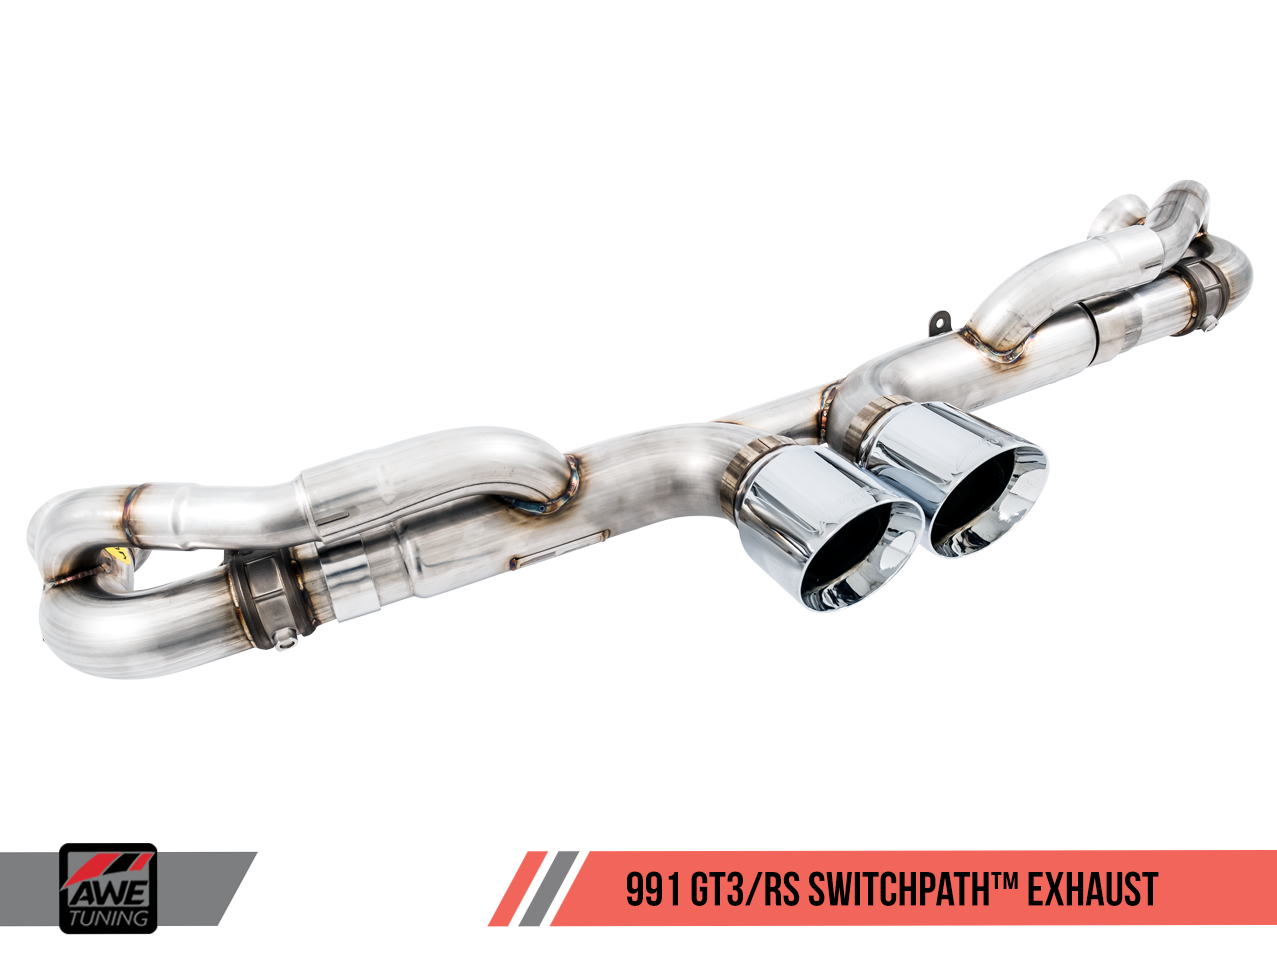 Engine - Exhaust - AWE SwitchPath Exhaust for Porsche 991.1 / 991.2 GT3 / RS - Diamond Black Tips - Used - 2010 to 2019 Porsche GT3 - La Jolla, CA 92037, United States